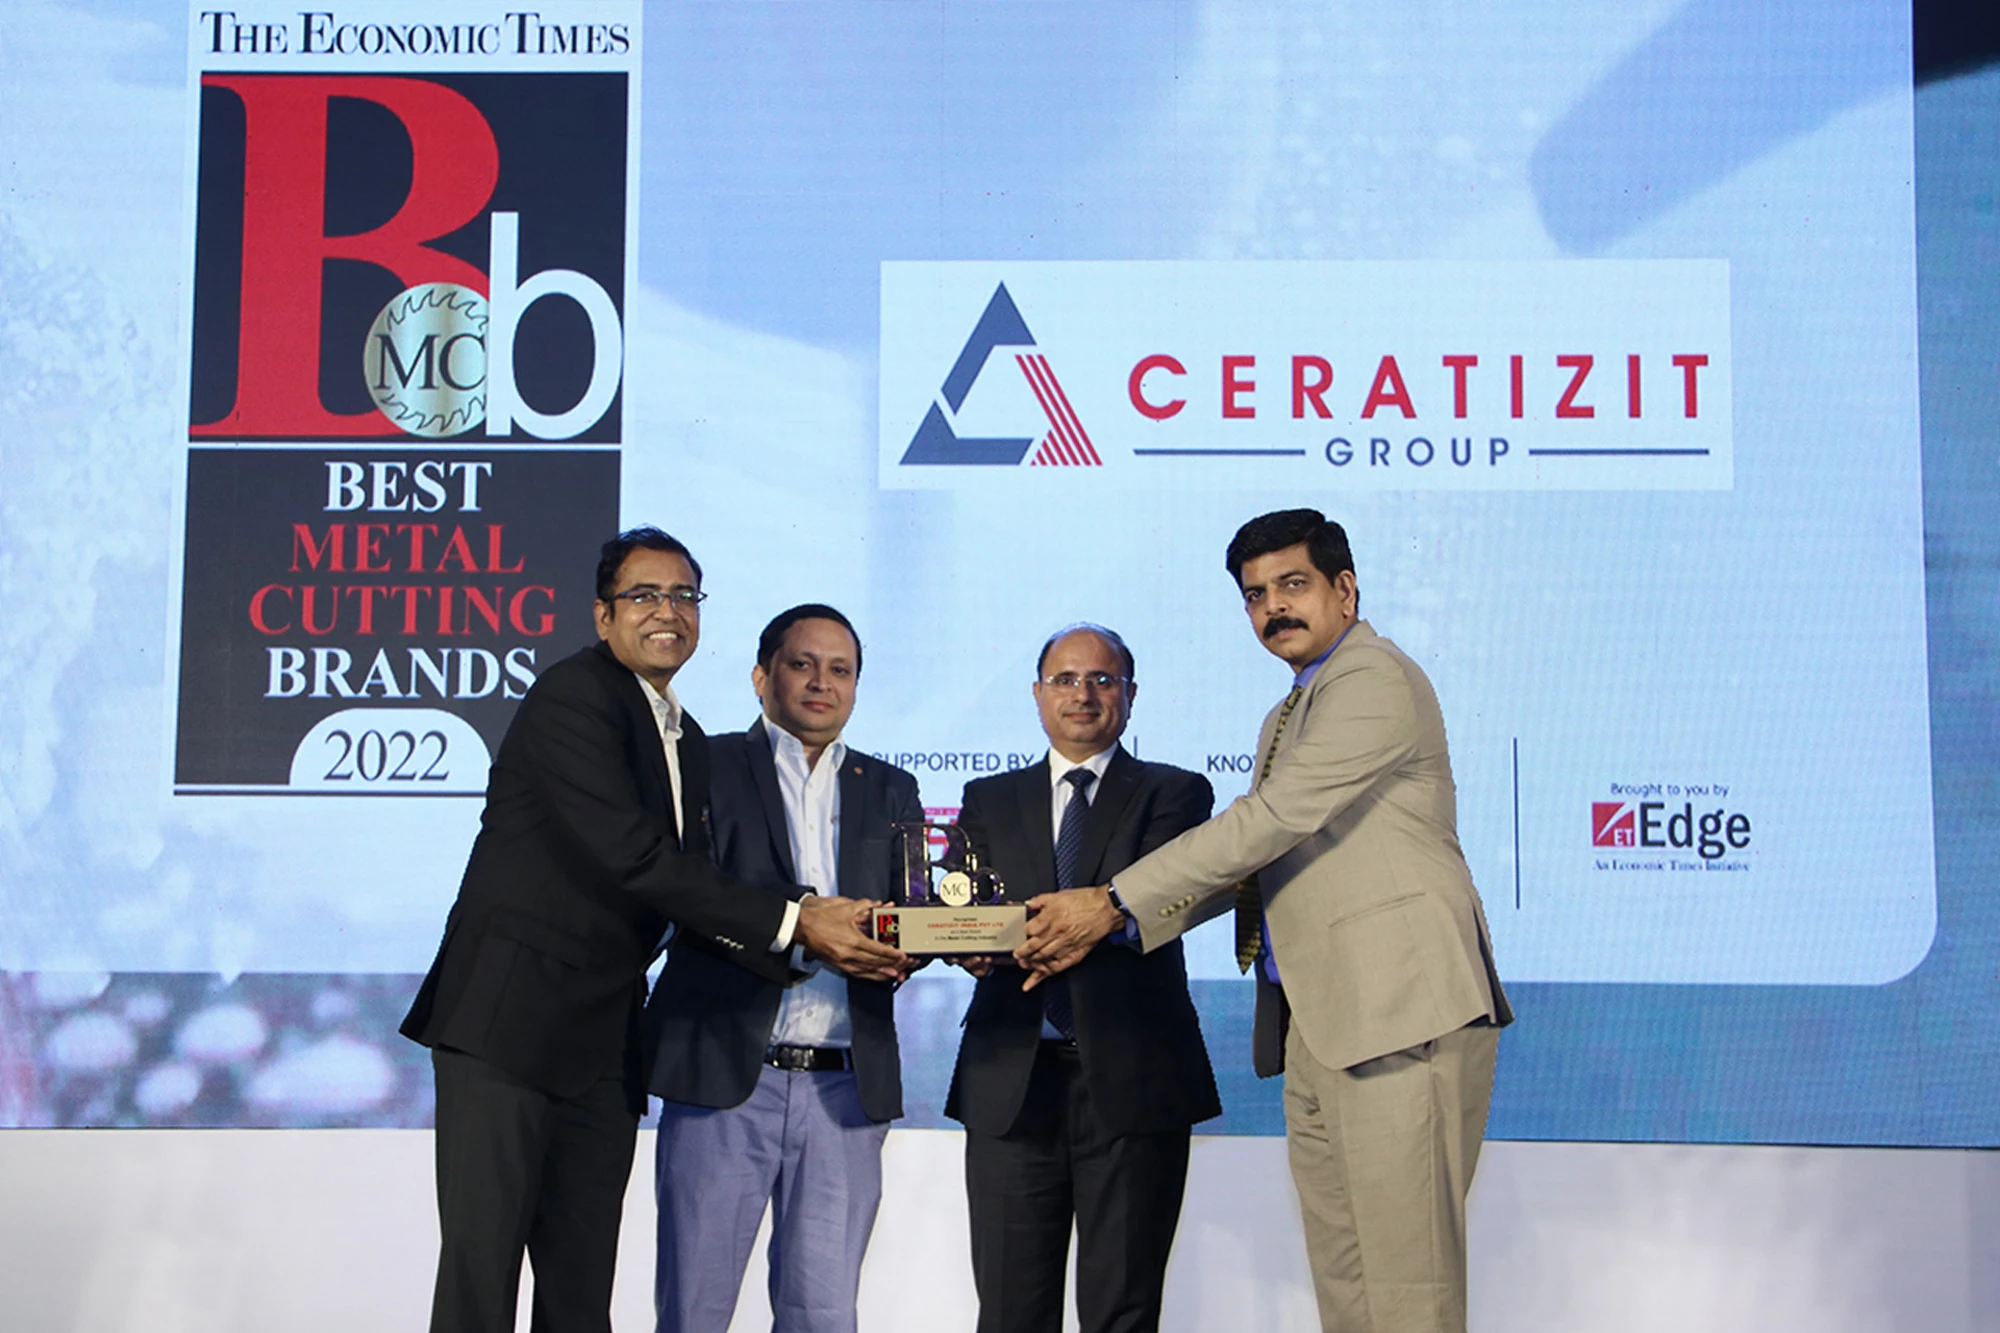 Best Brand Award in Metal Cutting Industry (The Economic Times)